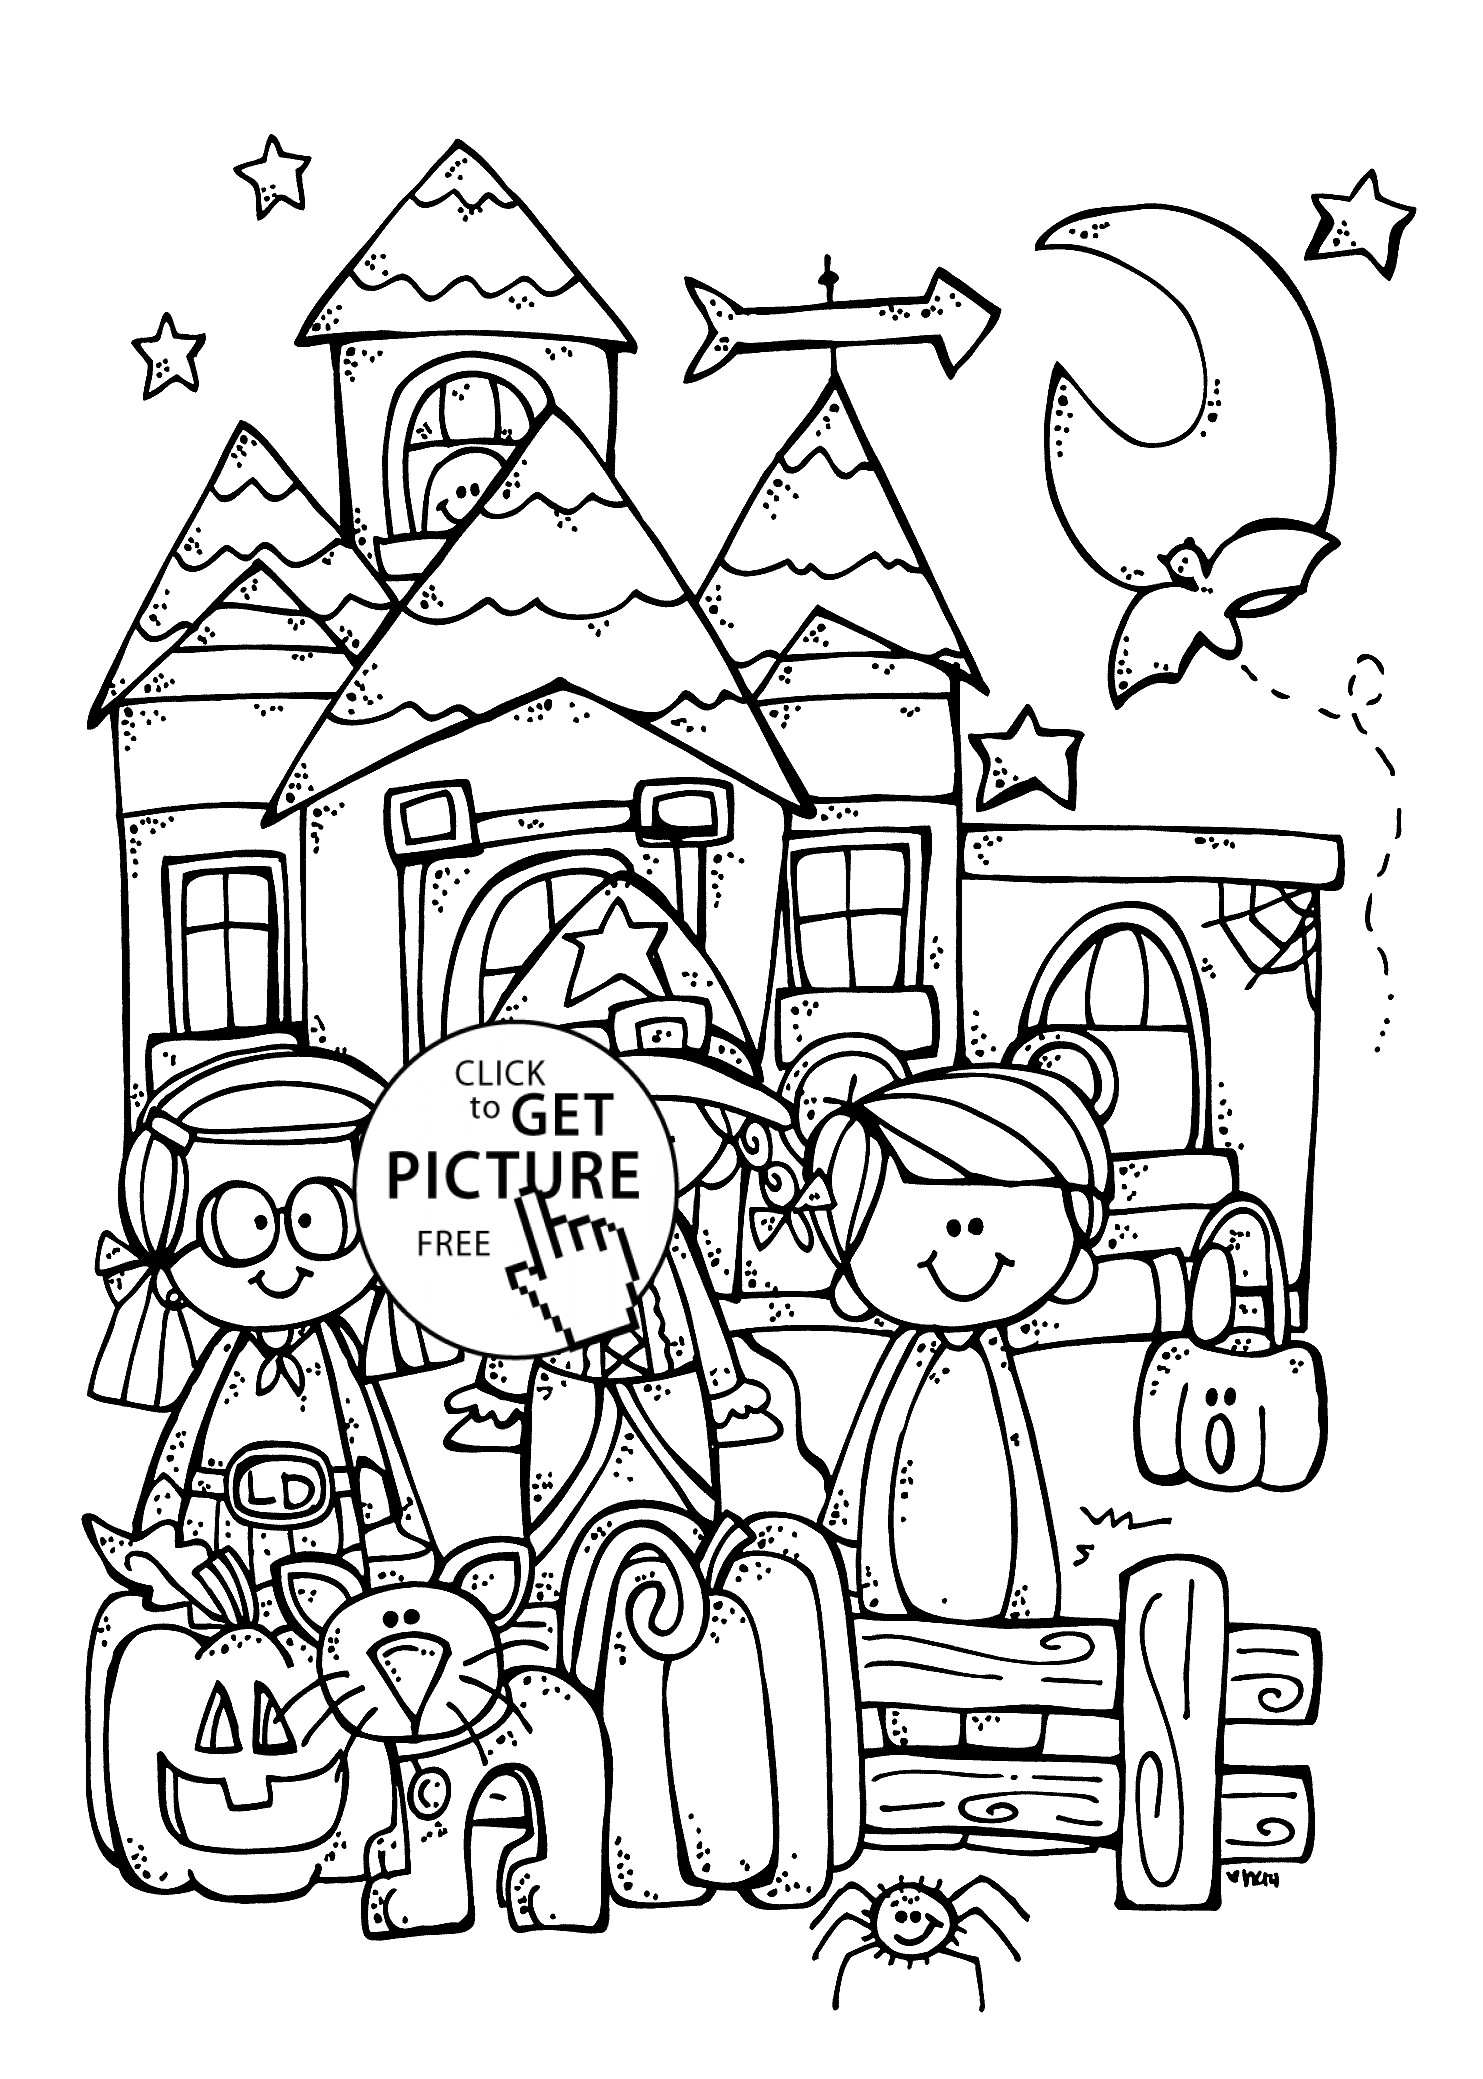 Kids Coloring Pages Halloween
 Halloween Drawing Pages at GetDrawings